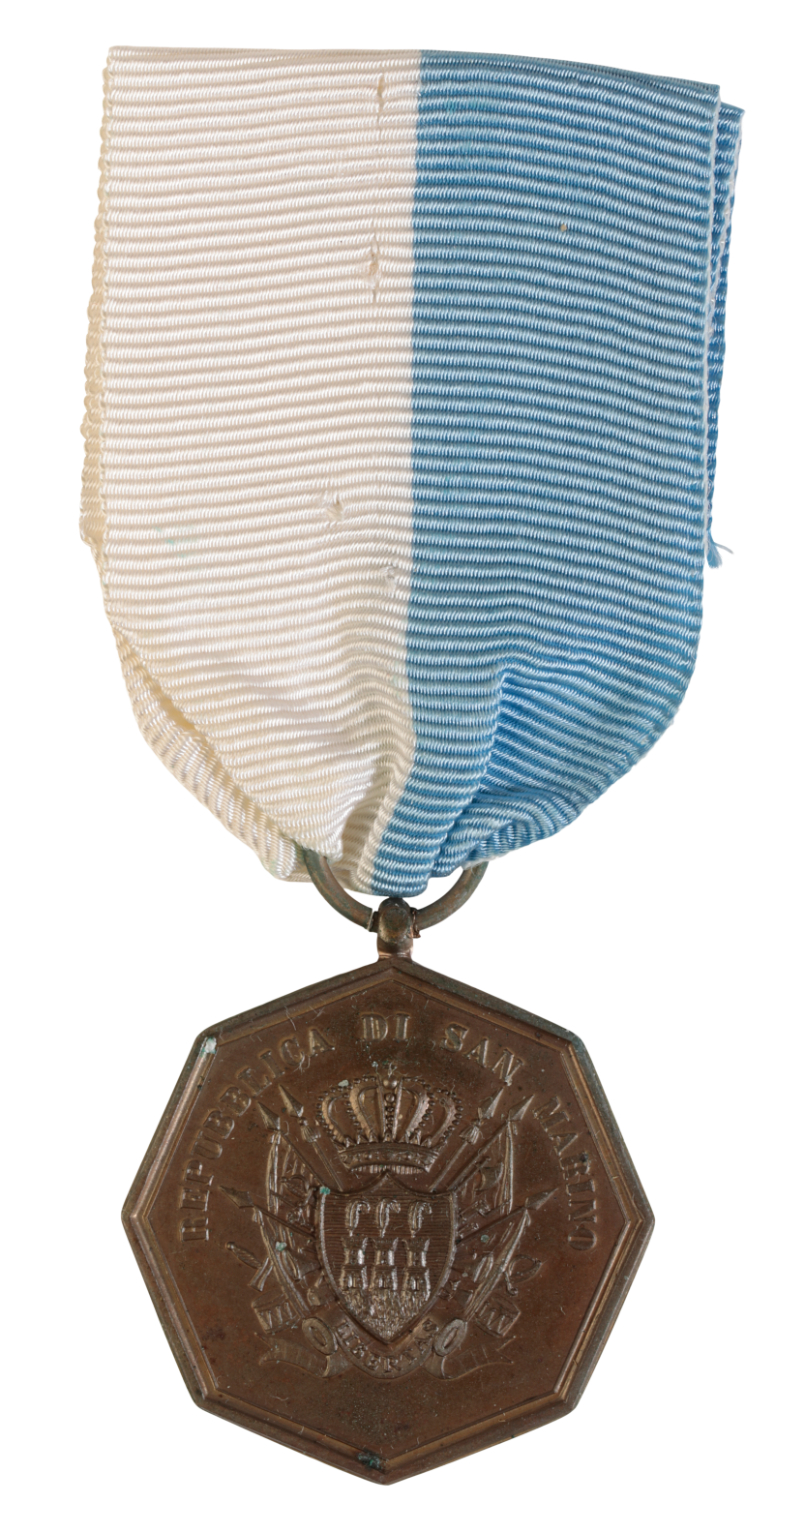 SAN MARINO MEDAL FOR LONG SERVICE 3add34